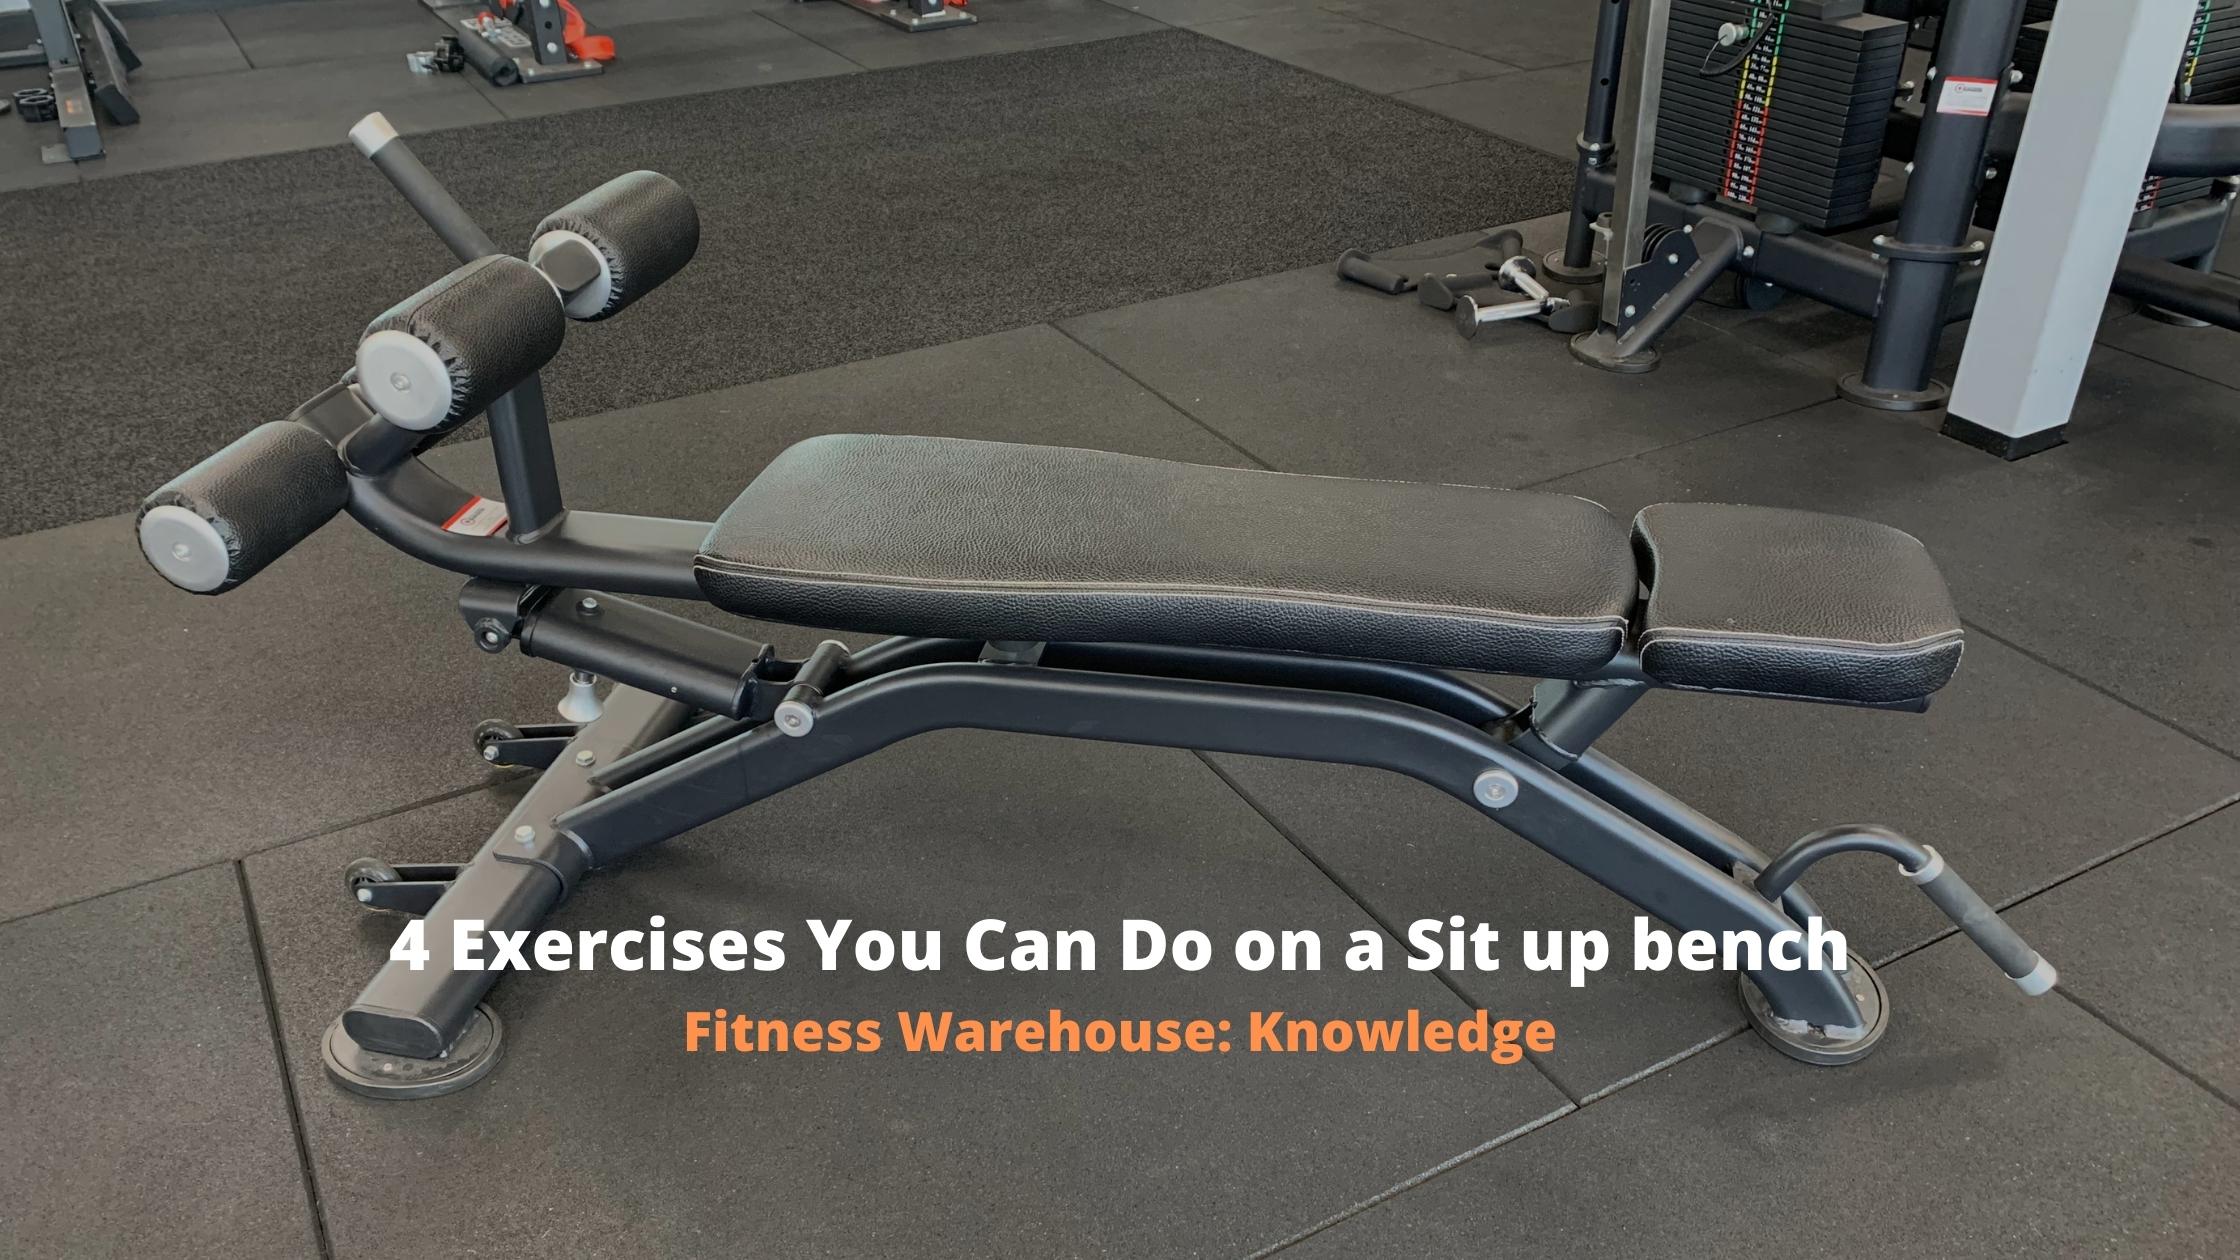 How to Use a Sit-Up Bench 